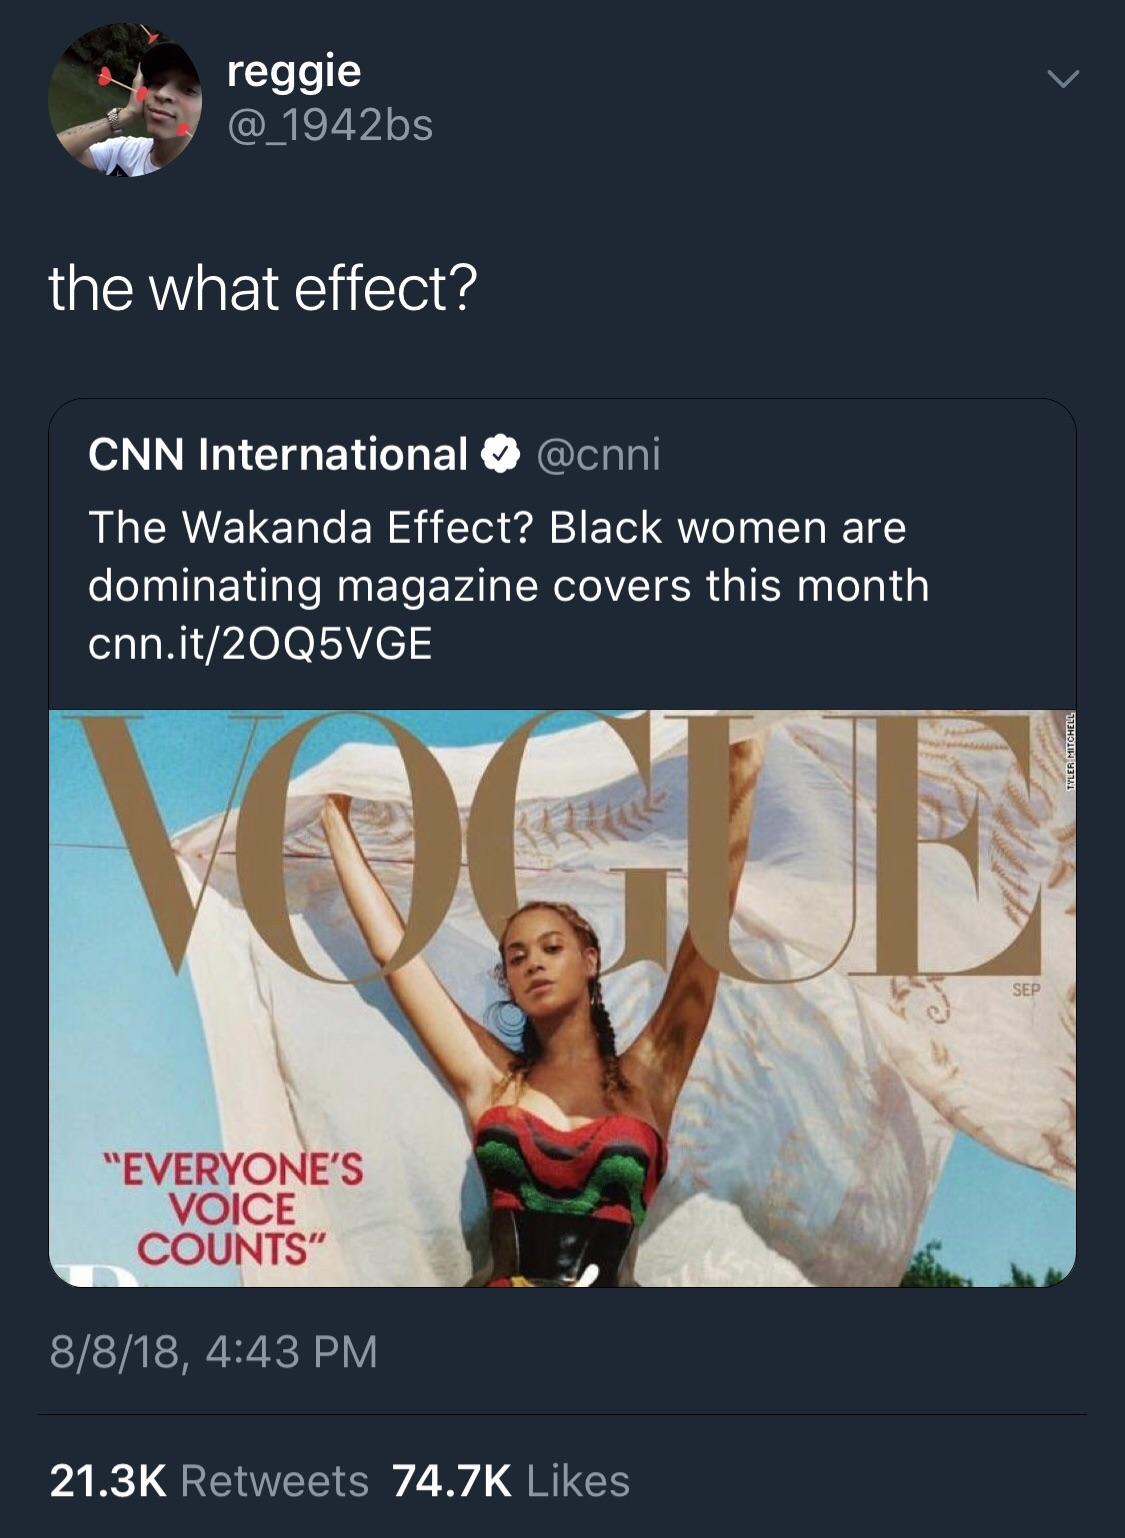 poster - reggie the what effect? Cnn International The Wakanda Effect? Black women are dominating magazine covers this month cnn.it20Q5VGE Tyler Mitchell Sep "Everyone'S Voice Counts" 8818,